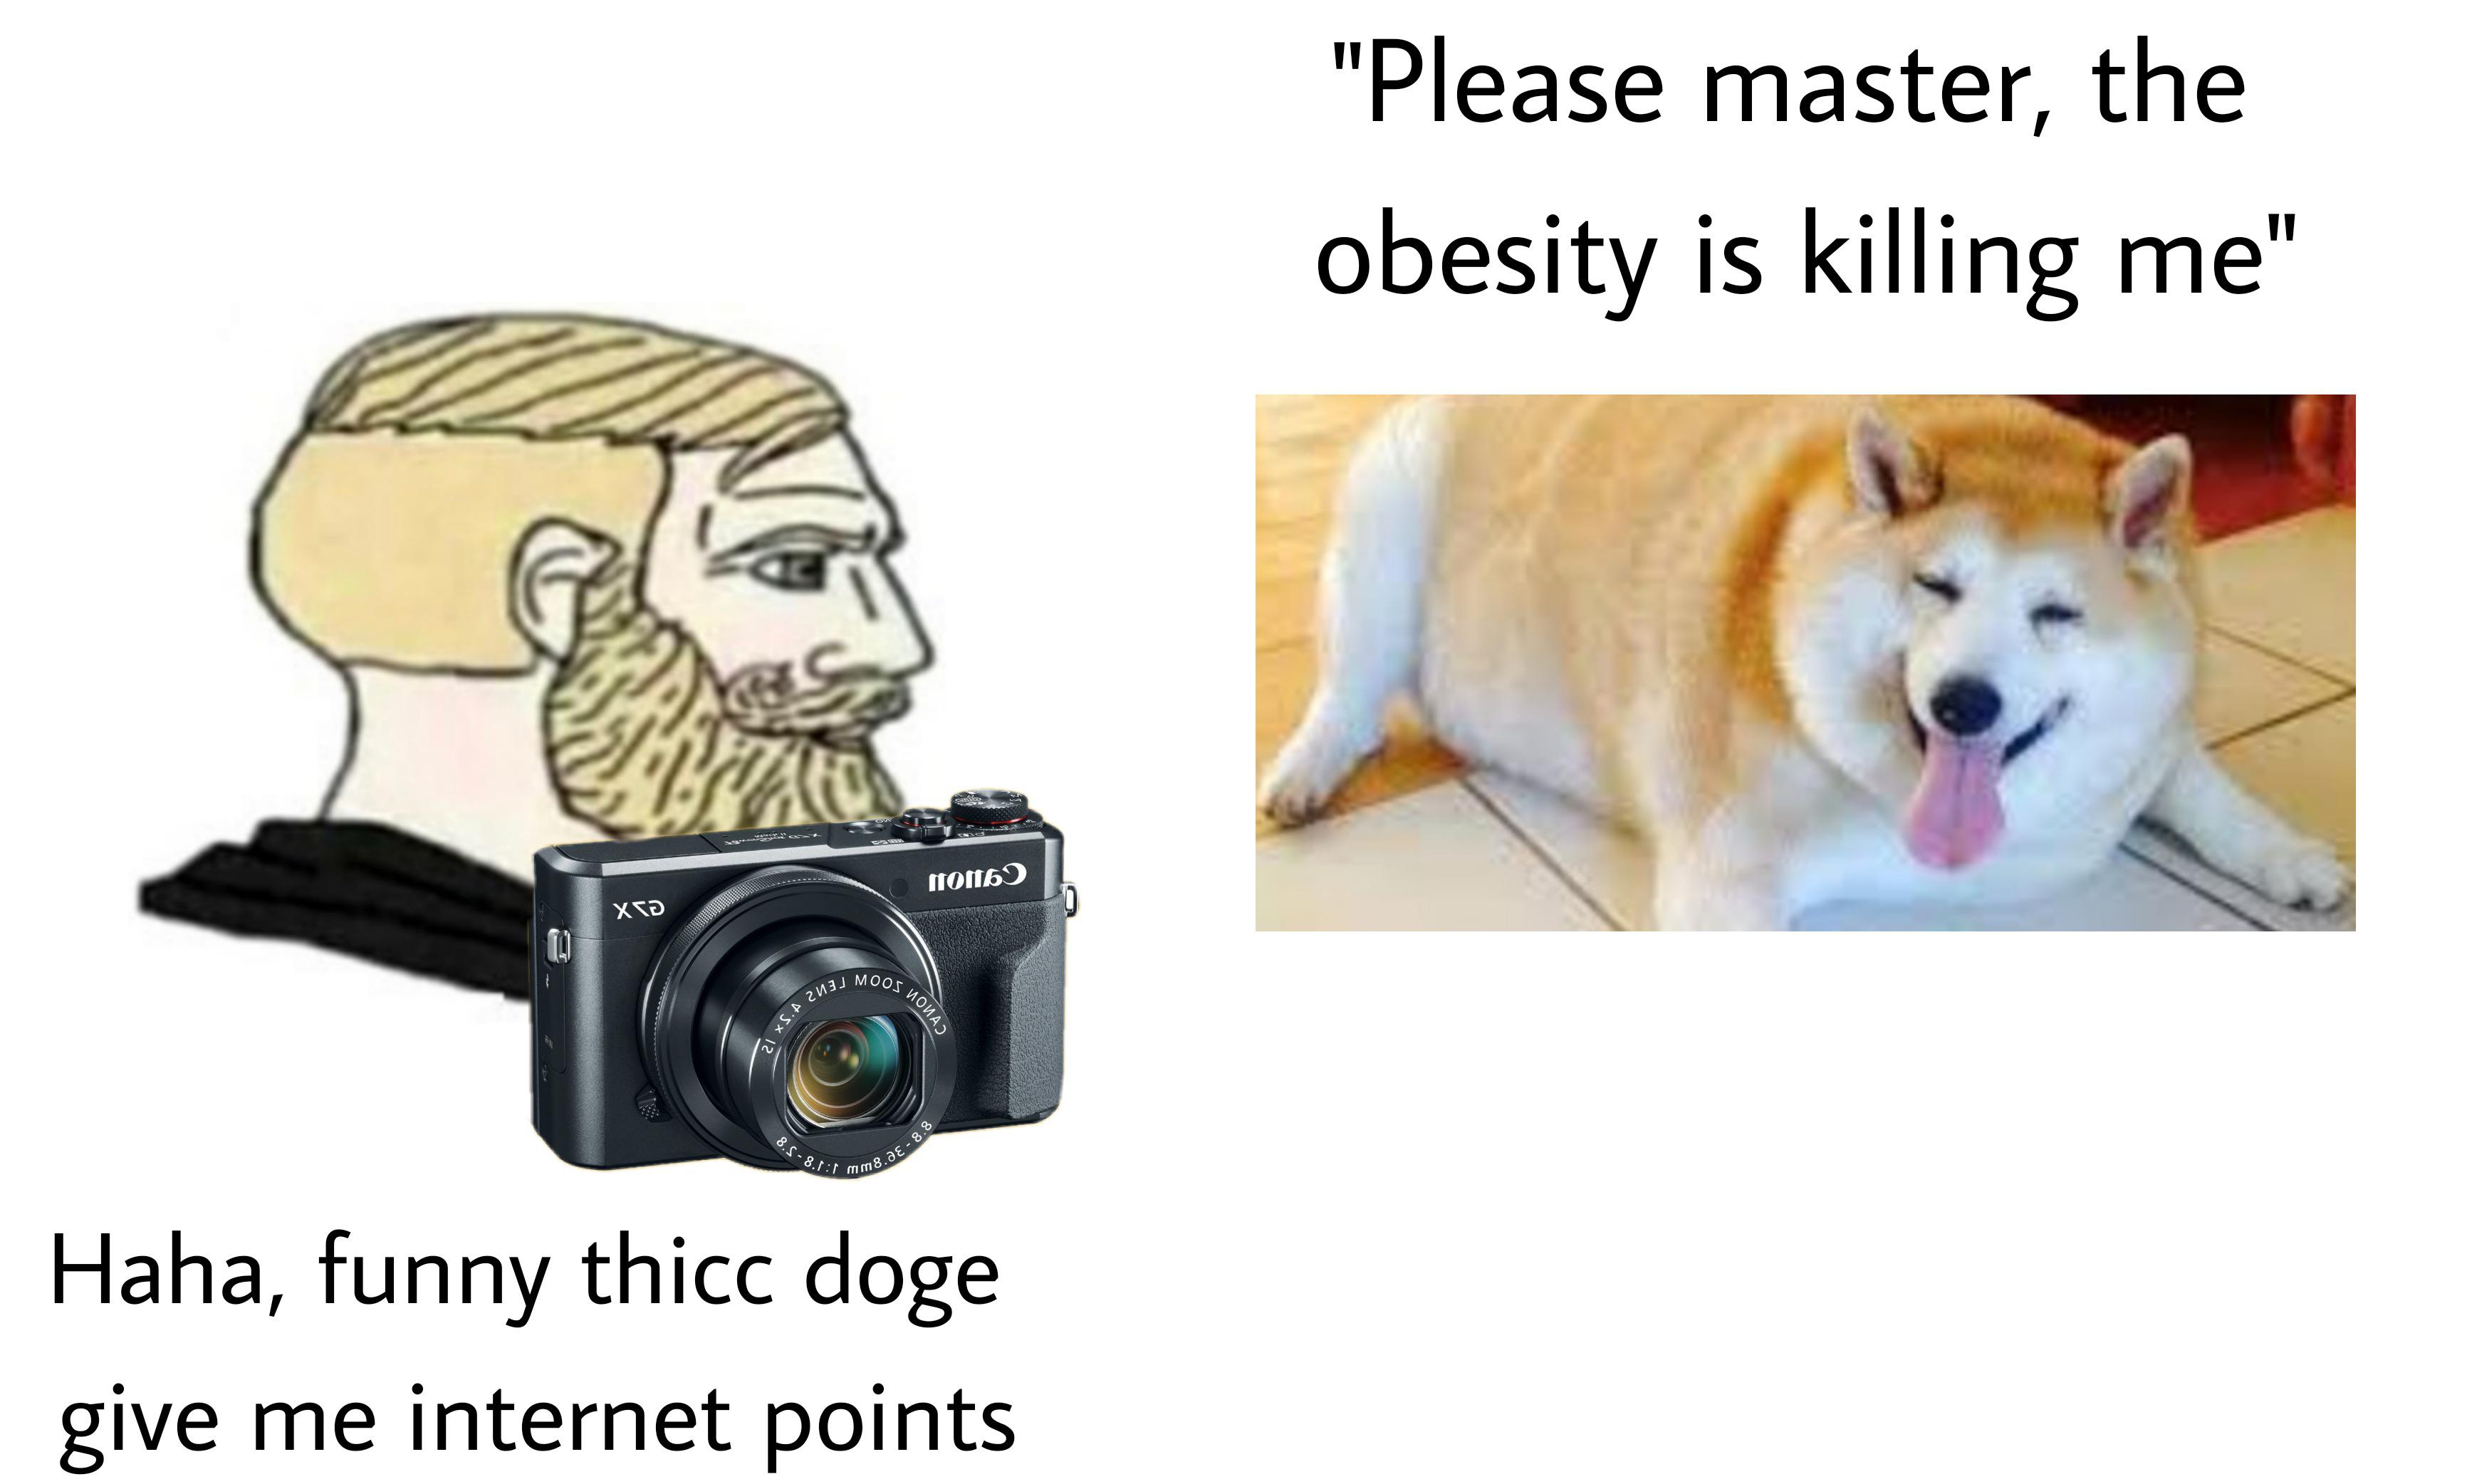 dog - Mm8. a E 8.8 "Please master, the obesity is killing me notto Xd 0 D Moos , , 21 xS.A Zug 8.58. Haha, funny thicc doge give me internet points